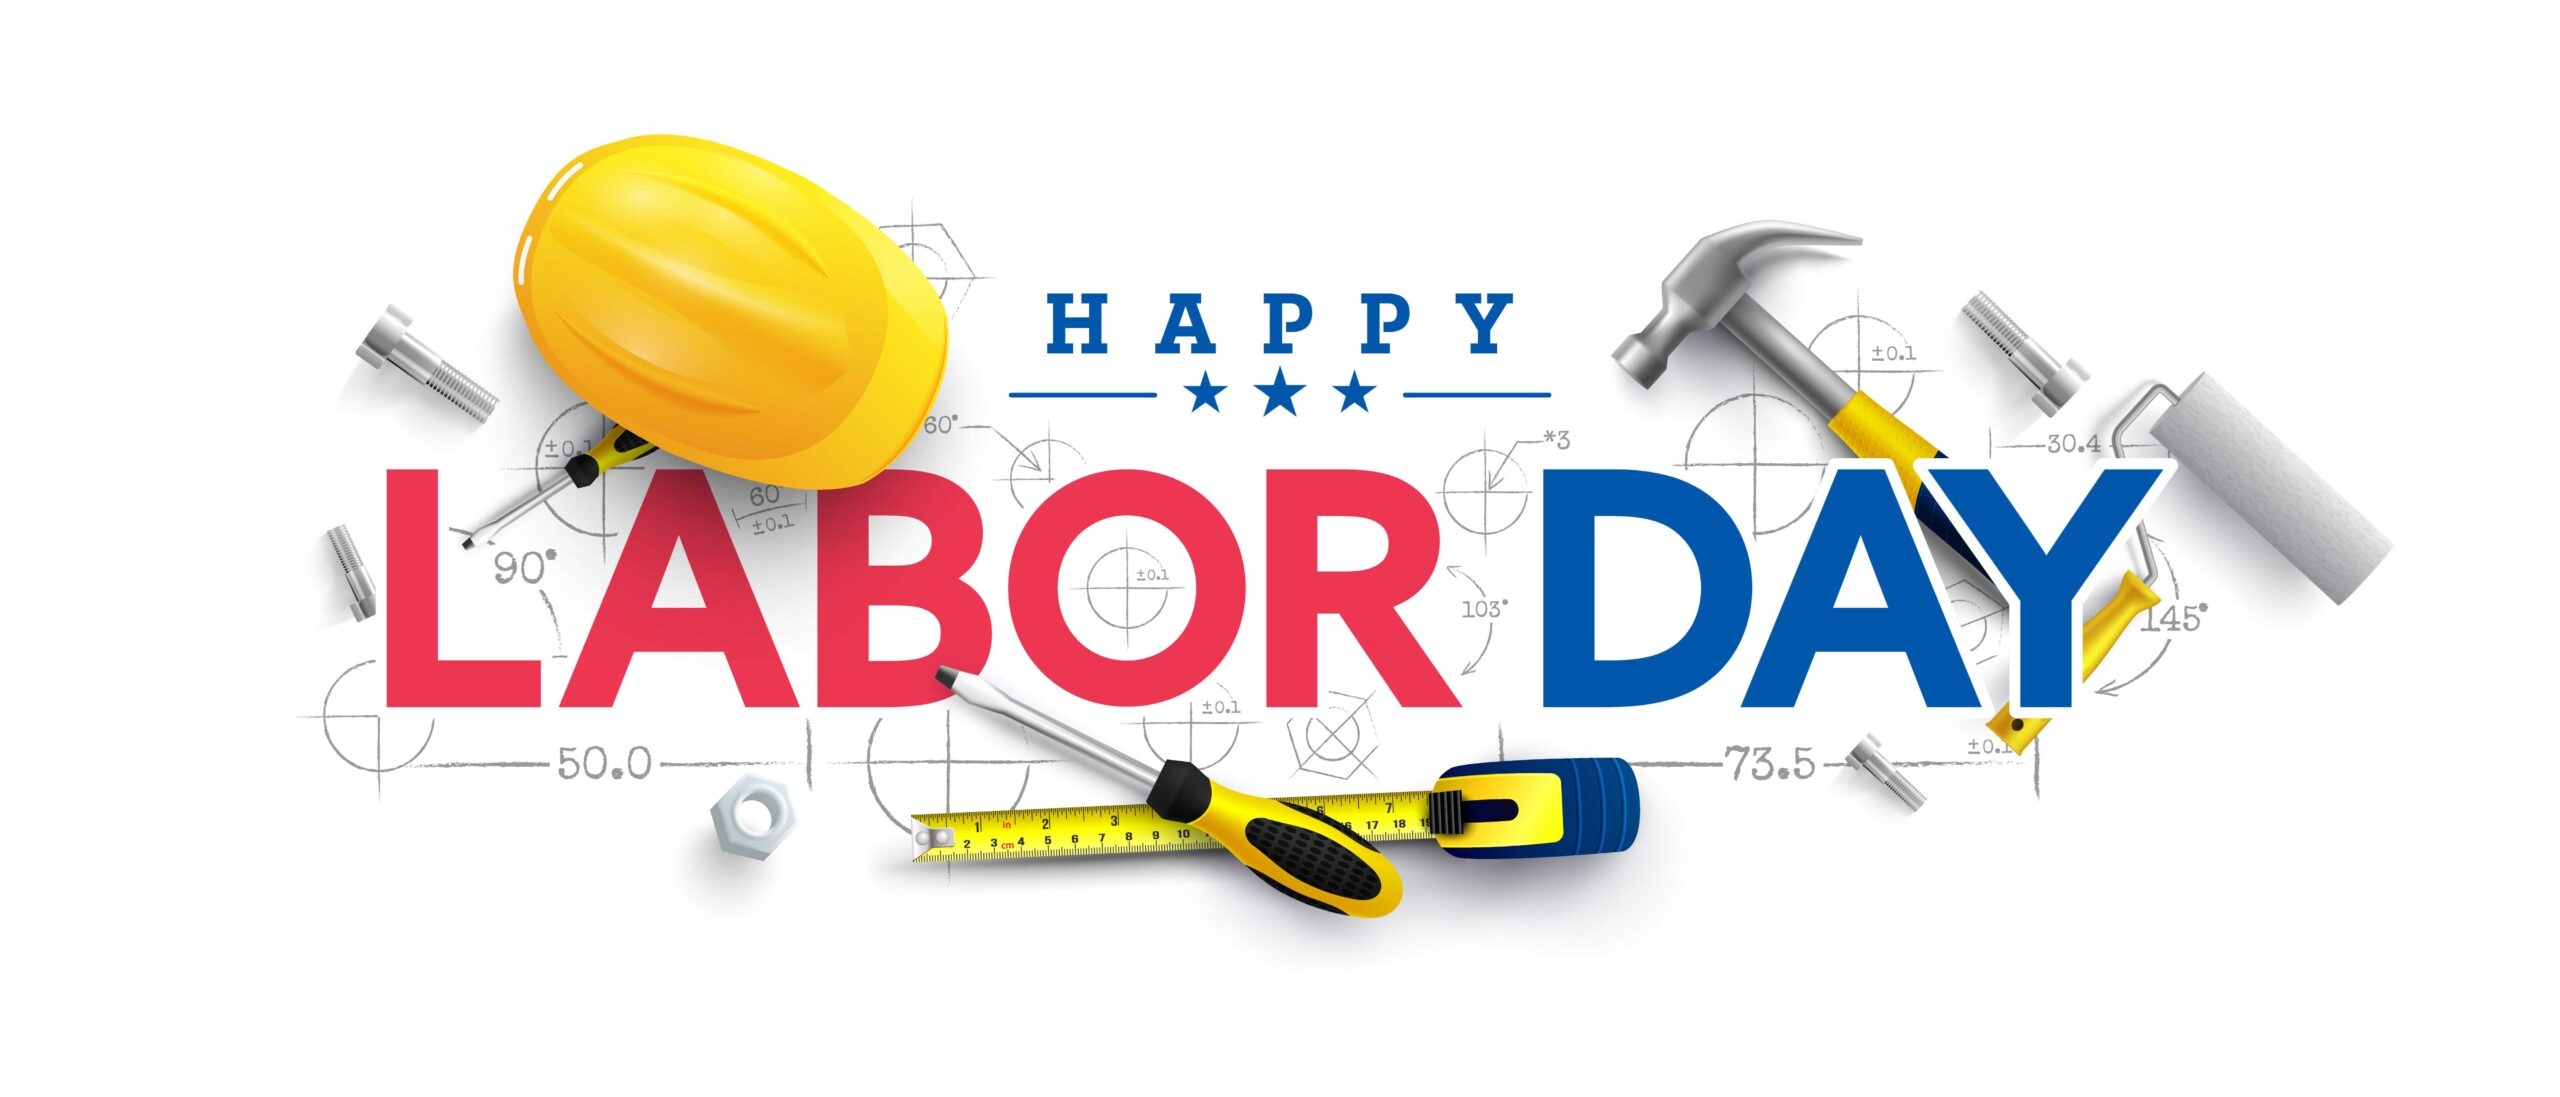 Labor Day Holiday, Happy labor day, HD image, Free download, 2560x1100 Dual Screen Desktop